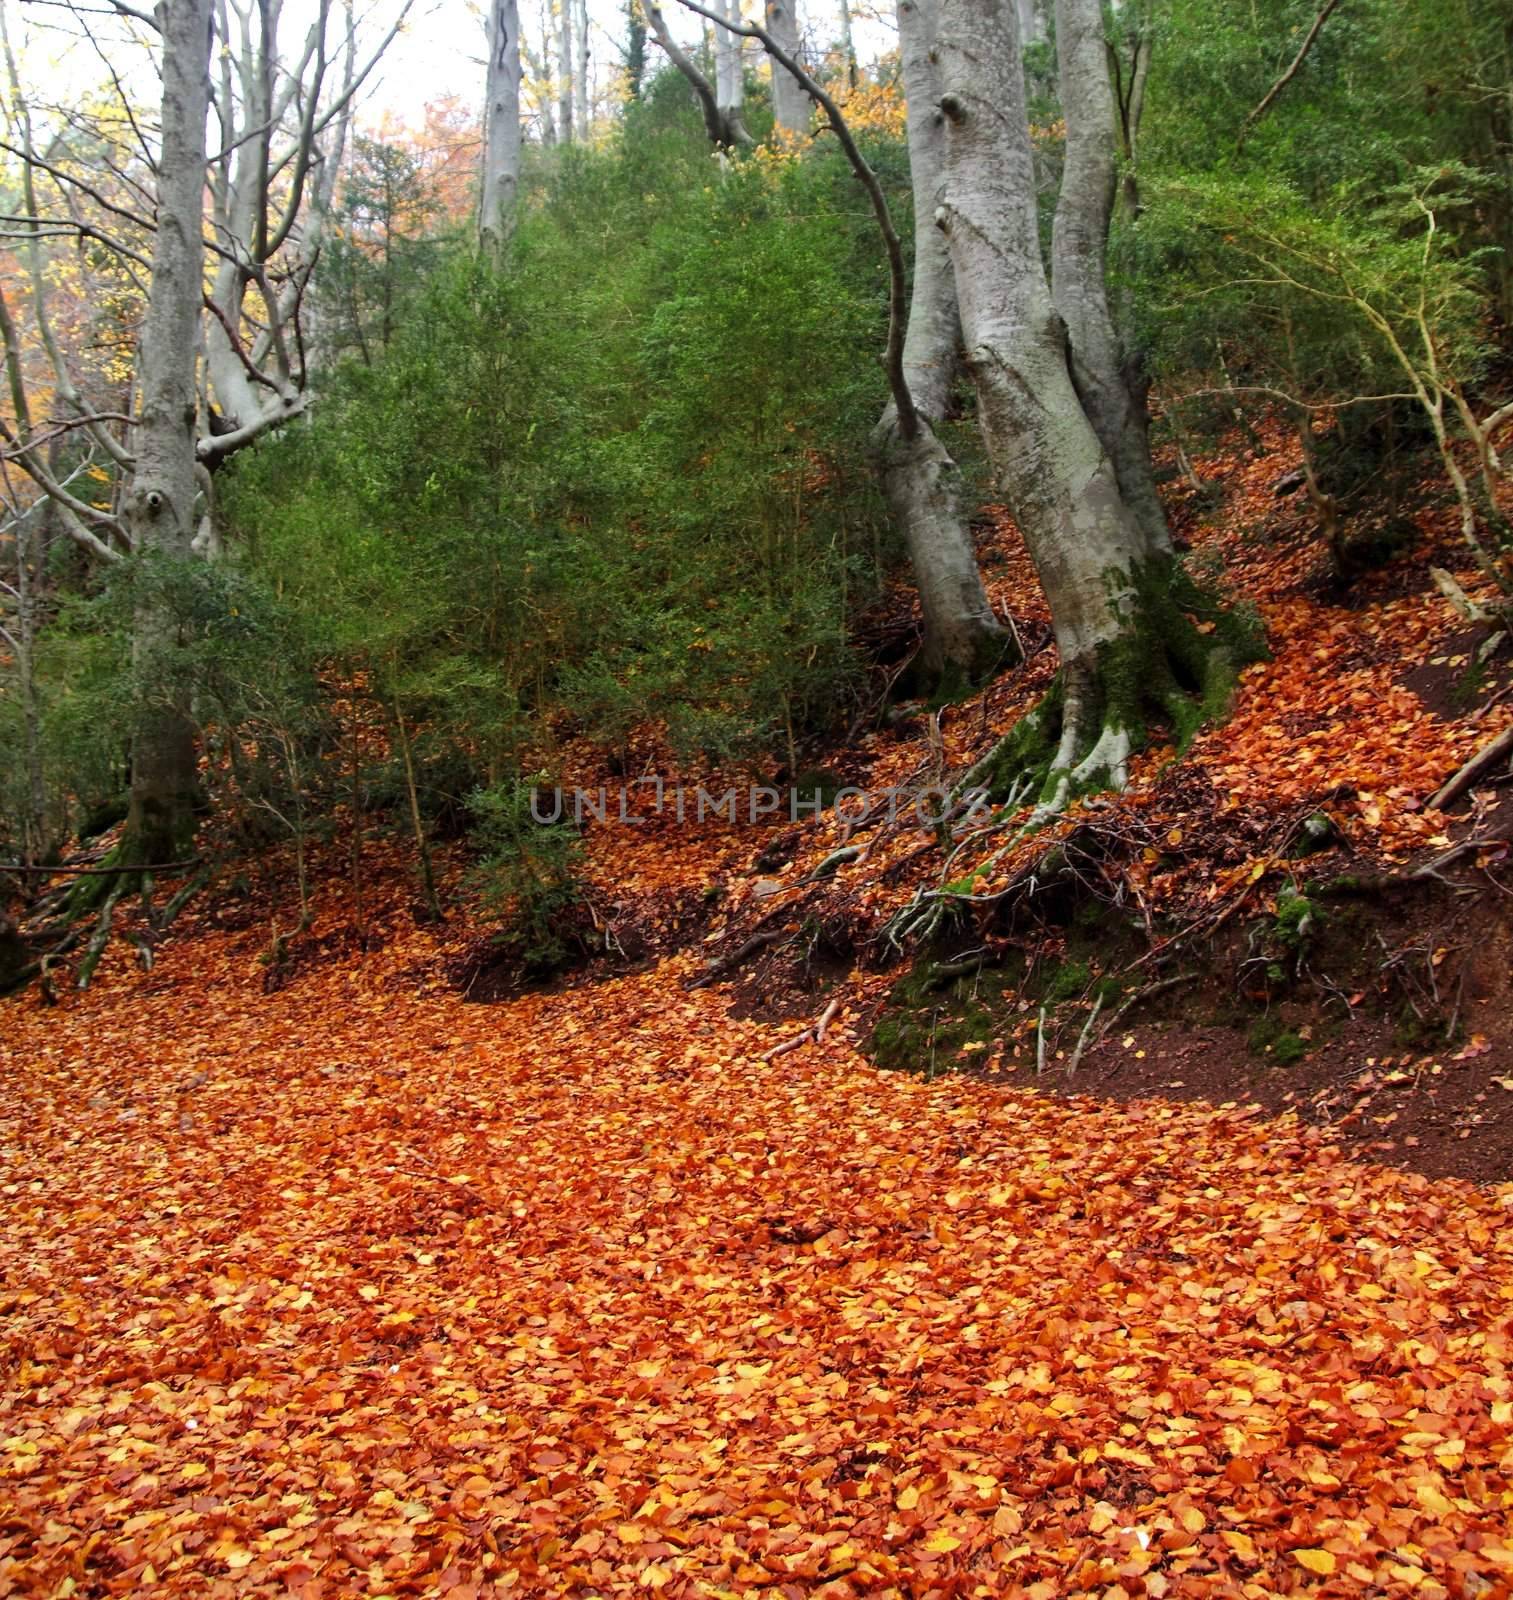 autumn centenary beech tree forest in fall golden leaves